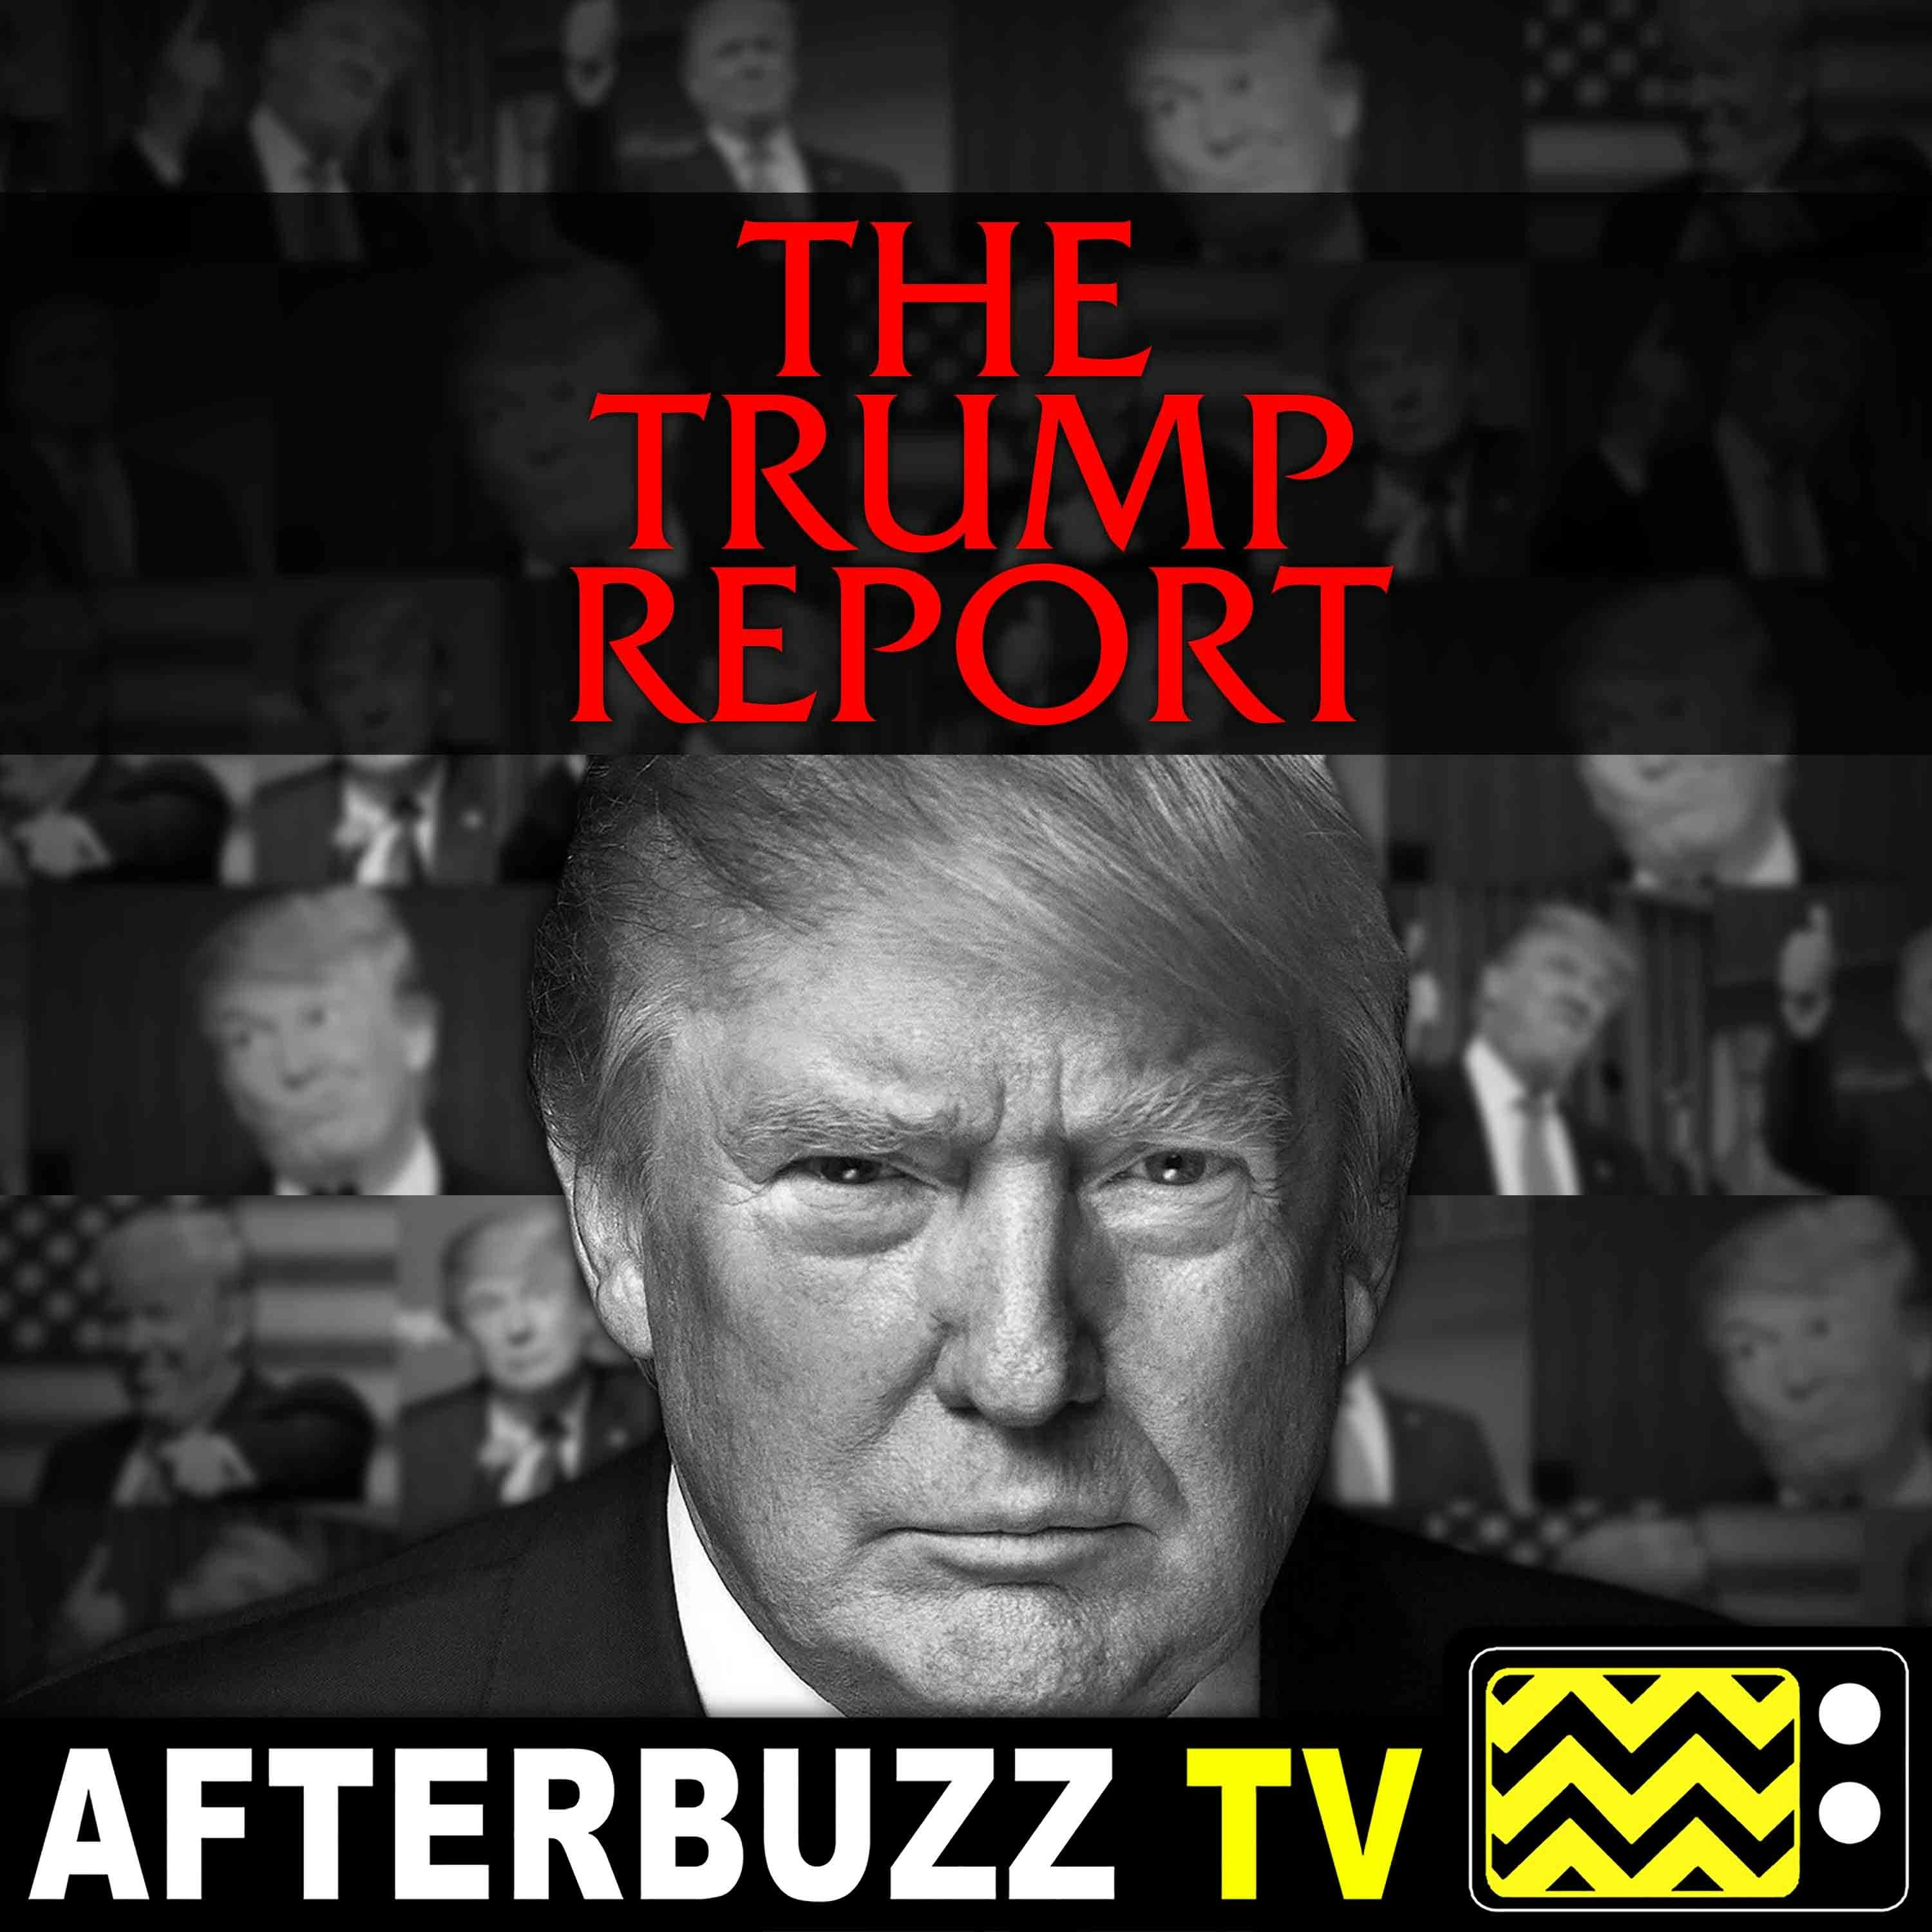 The Trump Report | 4 Boycotts & A Funeral | AfterBuzz TV